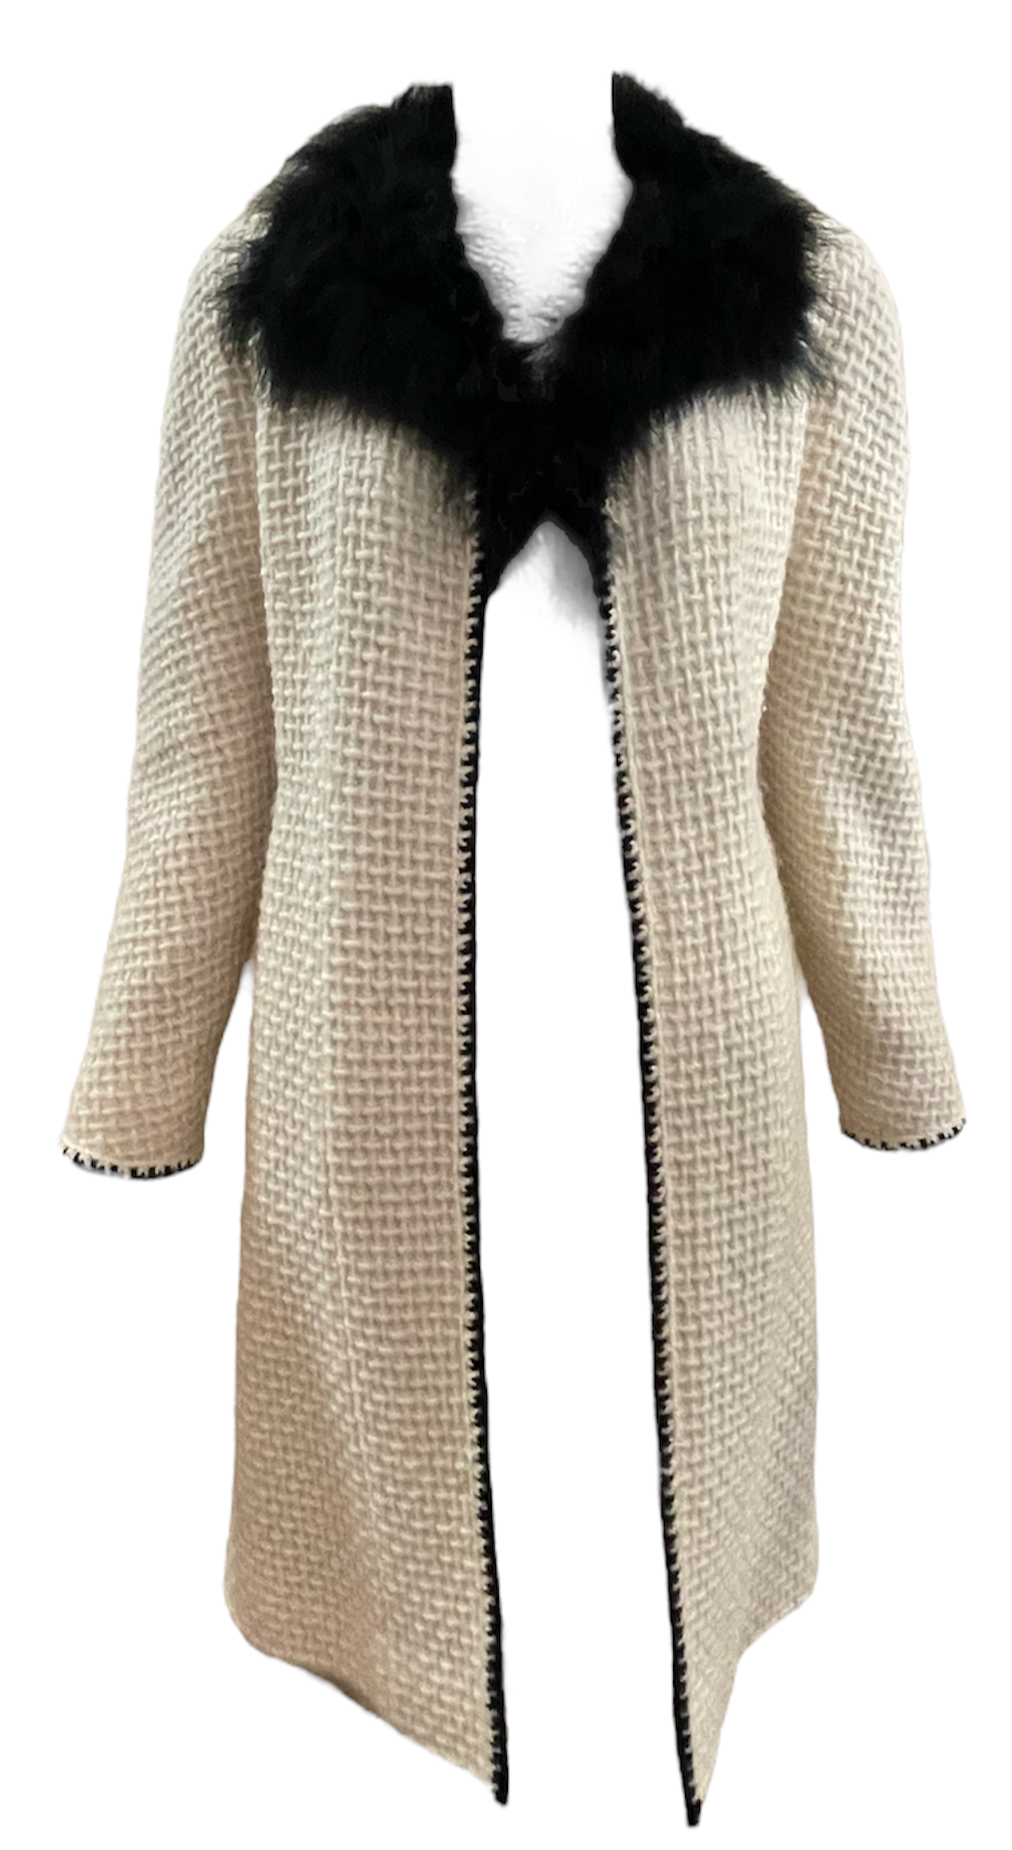  Chanel Contemporary White Wool Coat with Feathered Collar FRONT 1 of 5